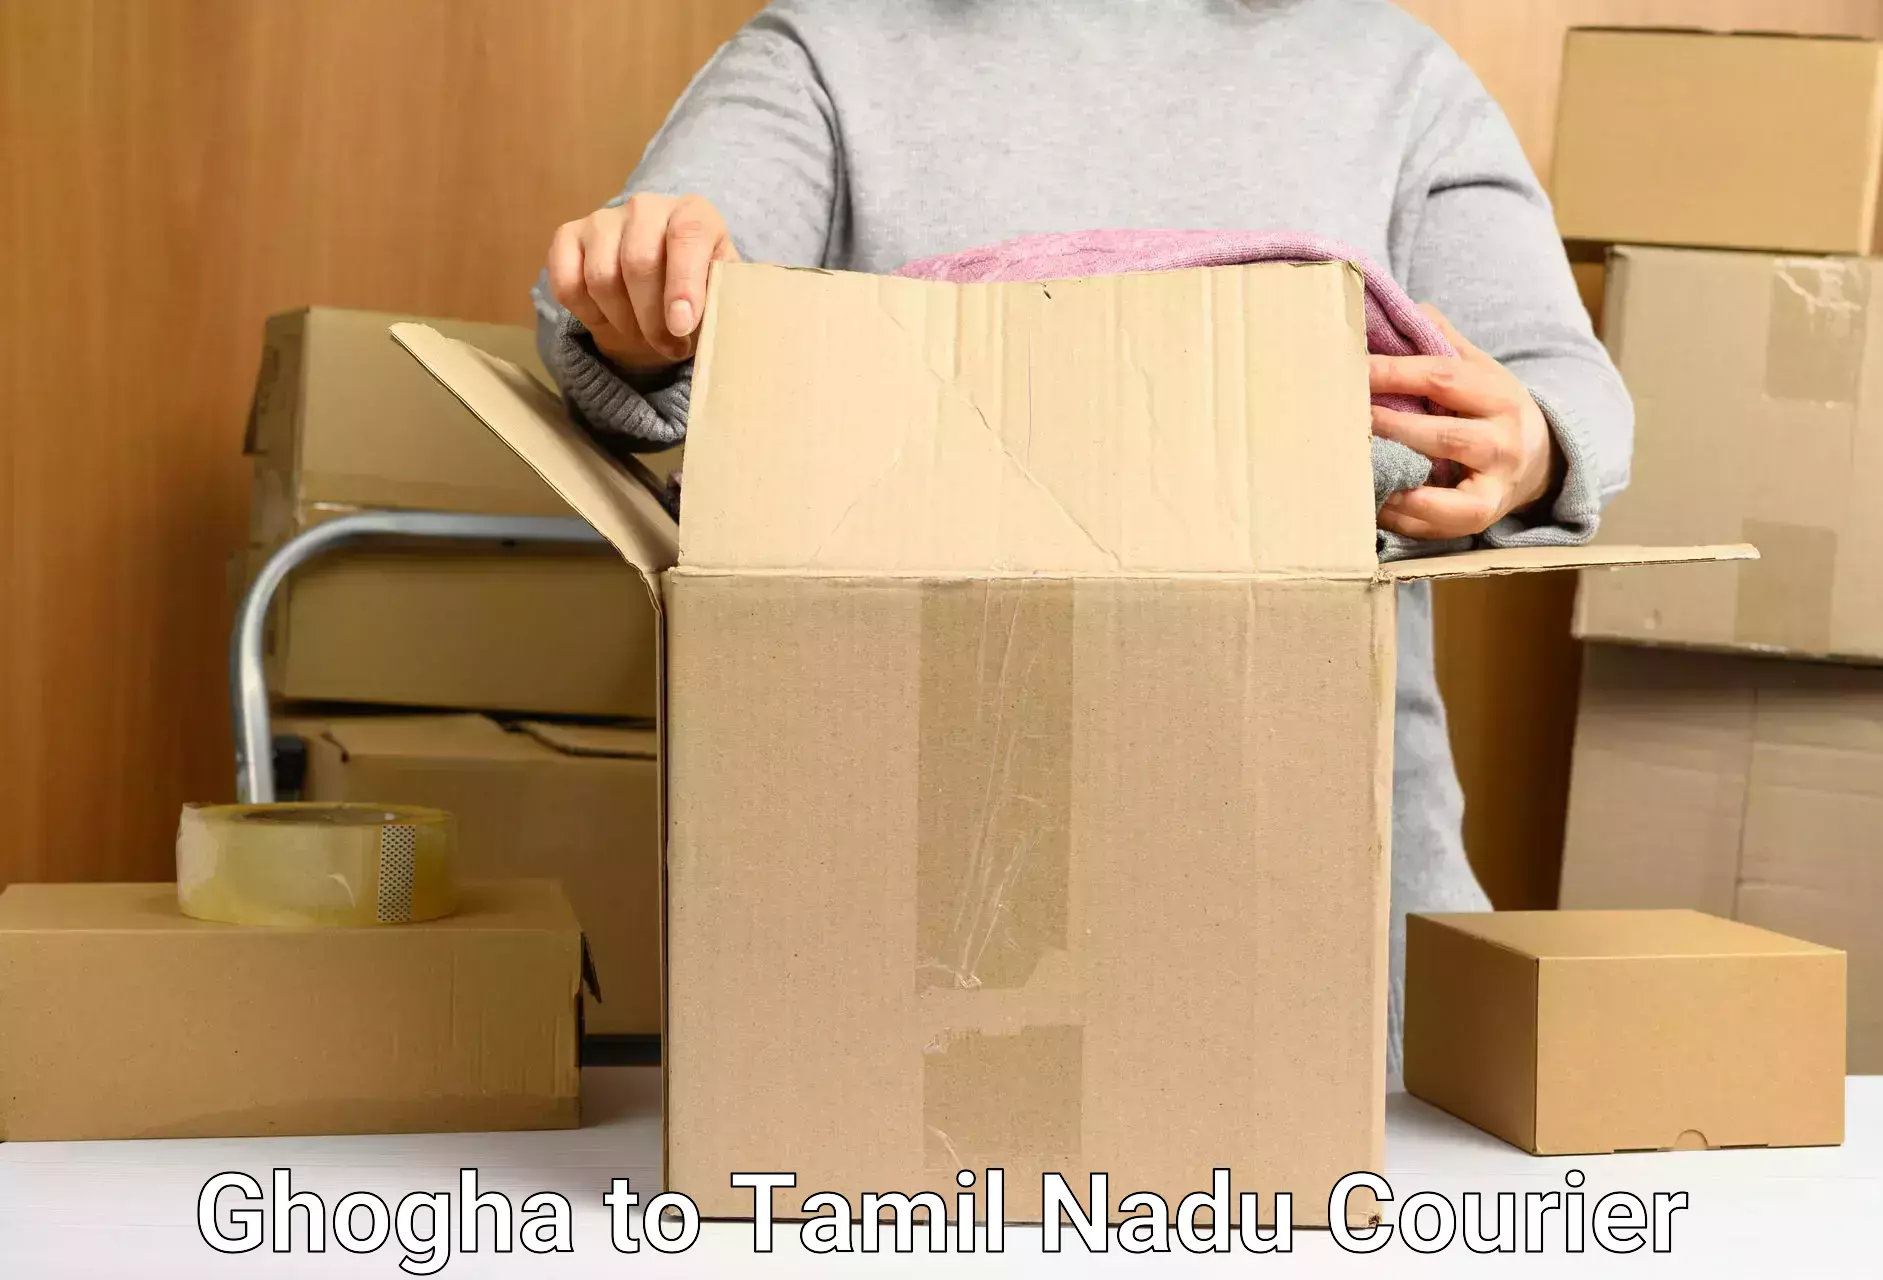 Parcel service for businesses Ghogha to Mettur